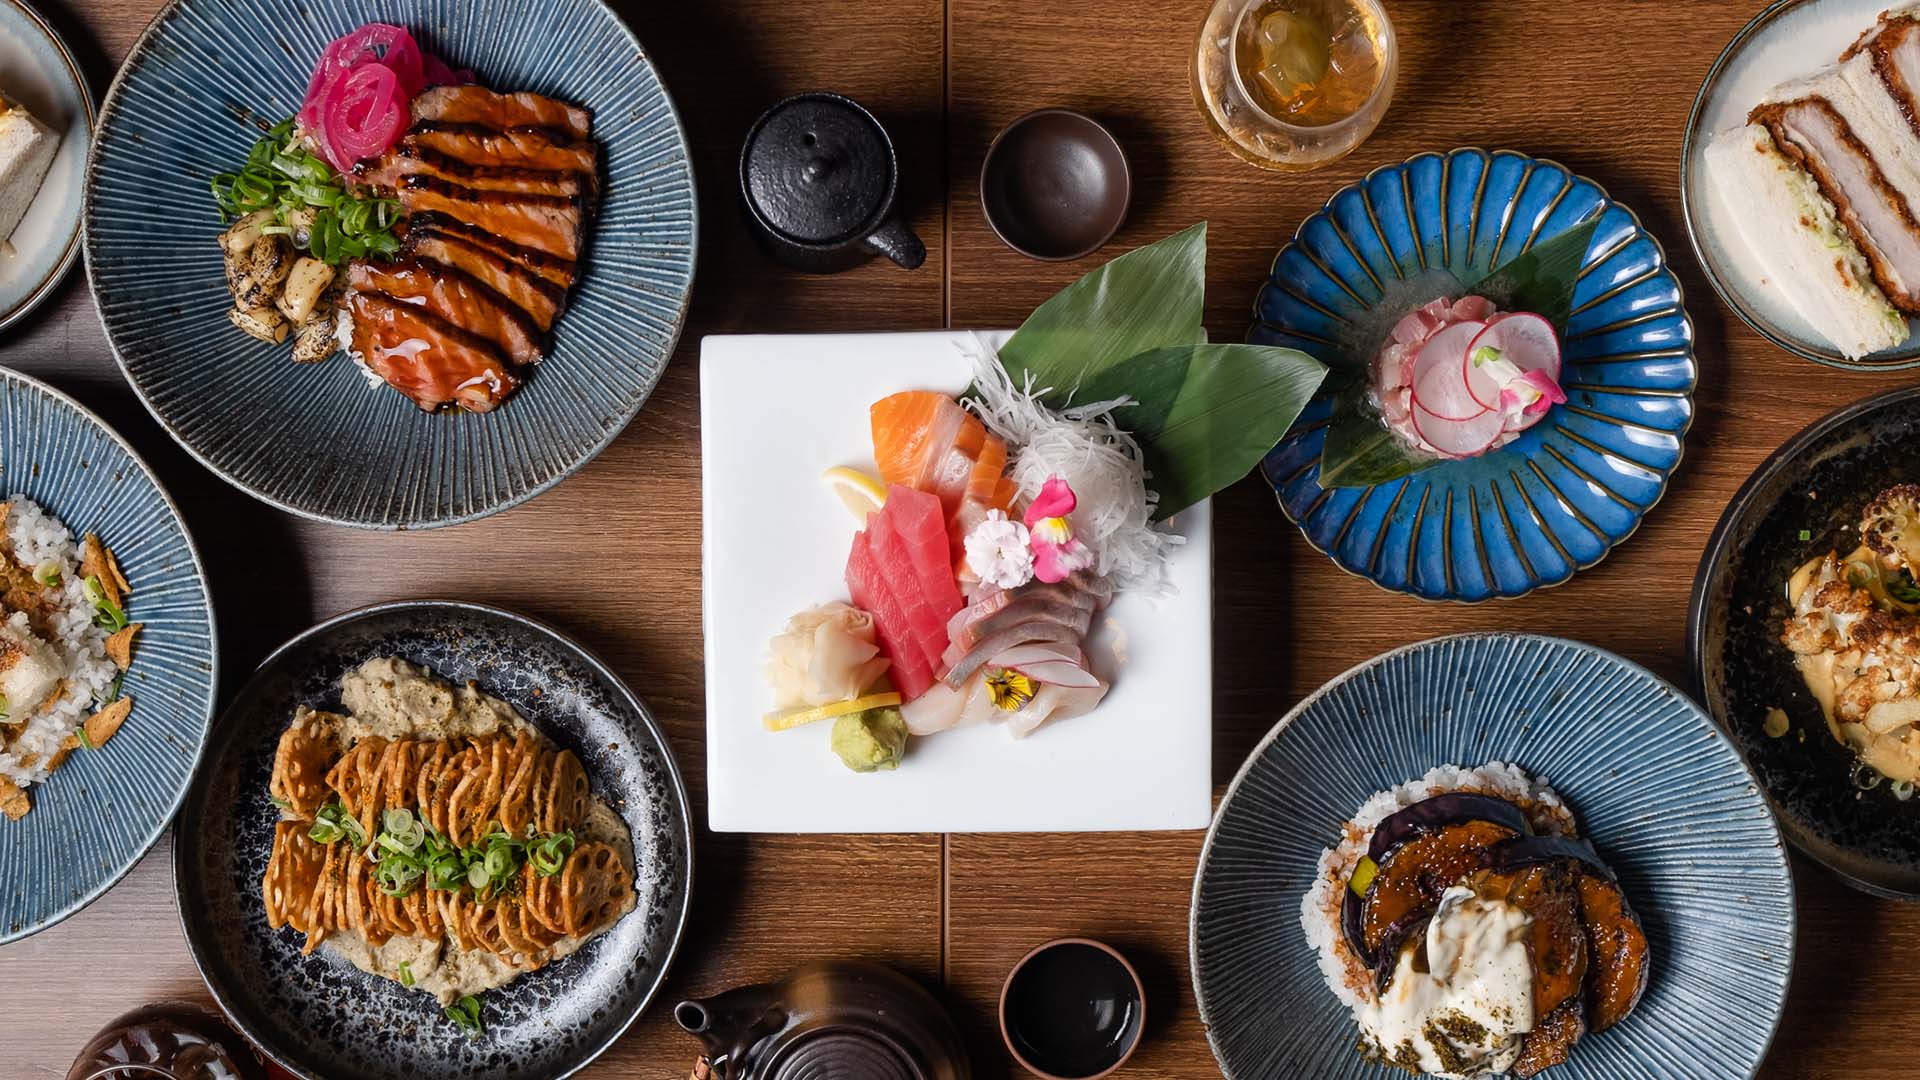 Now Open: Uncle Don Has Expanded Its Donburi Empire with a New Eatery at Woolloongabba's South City Square